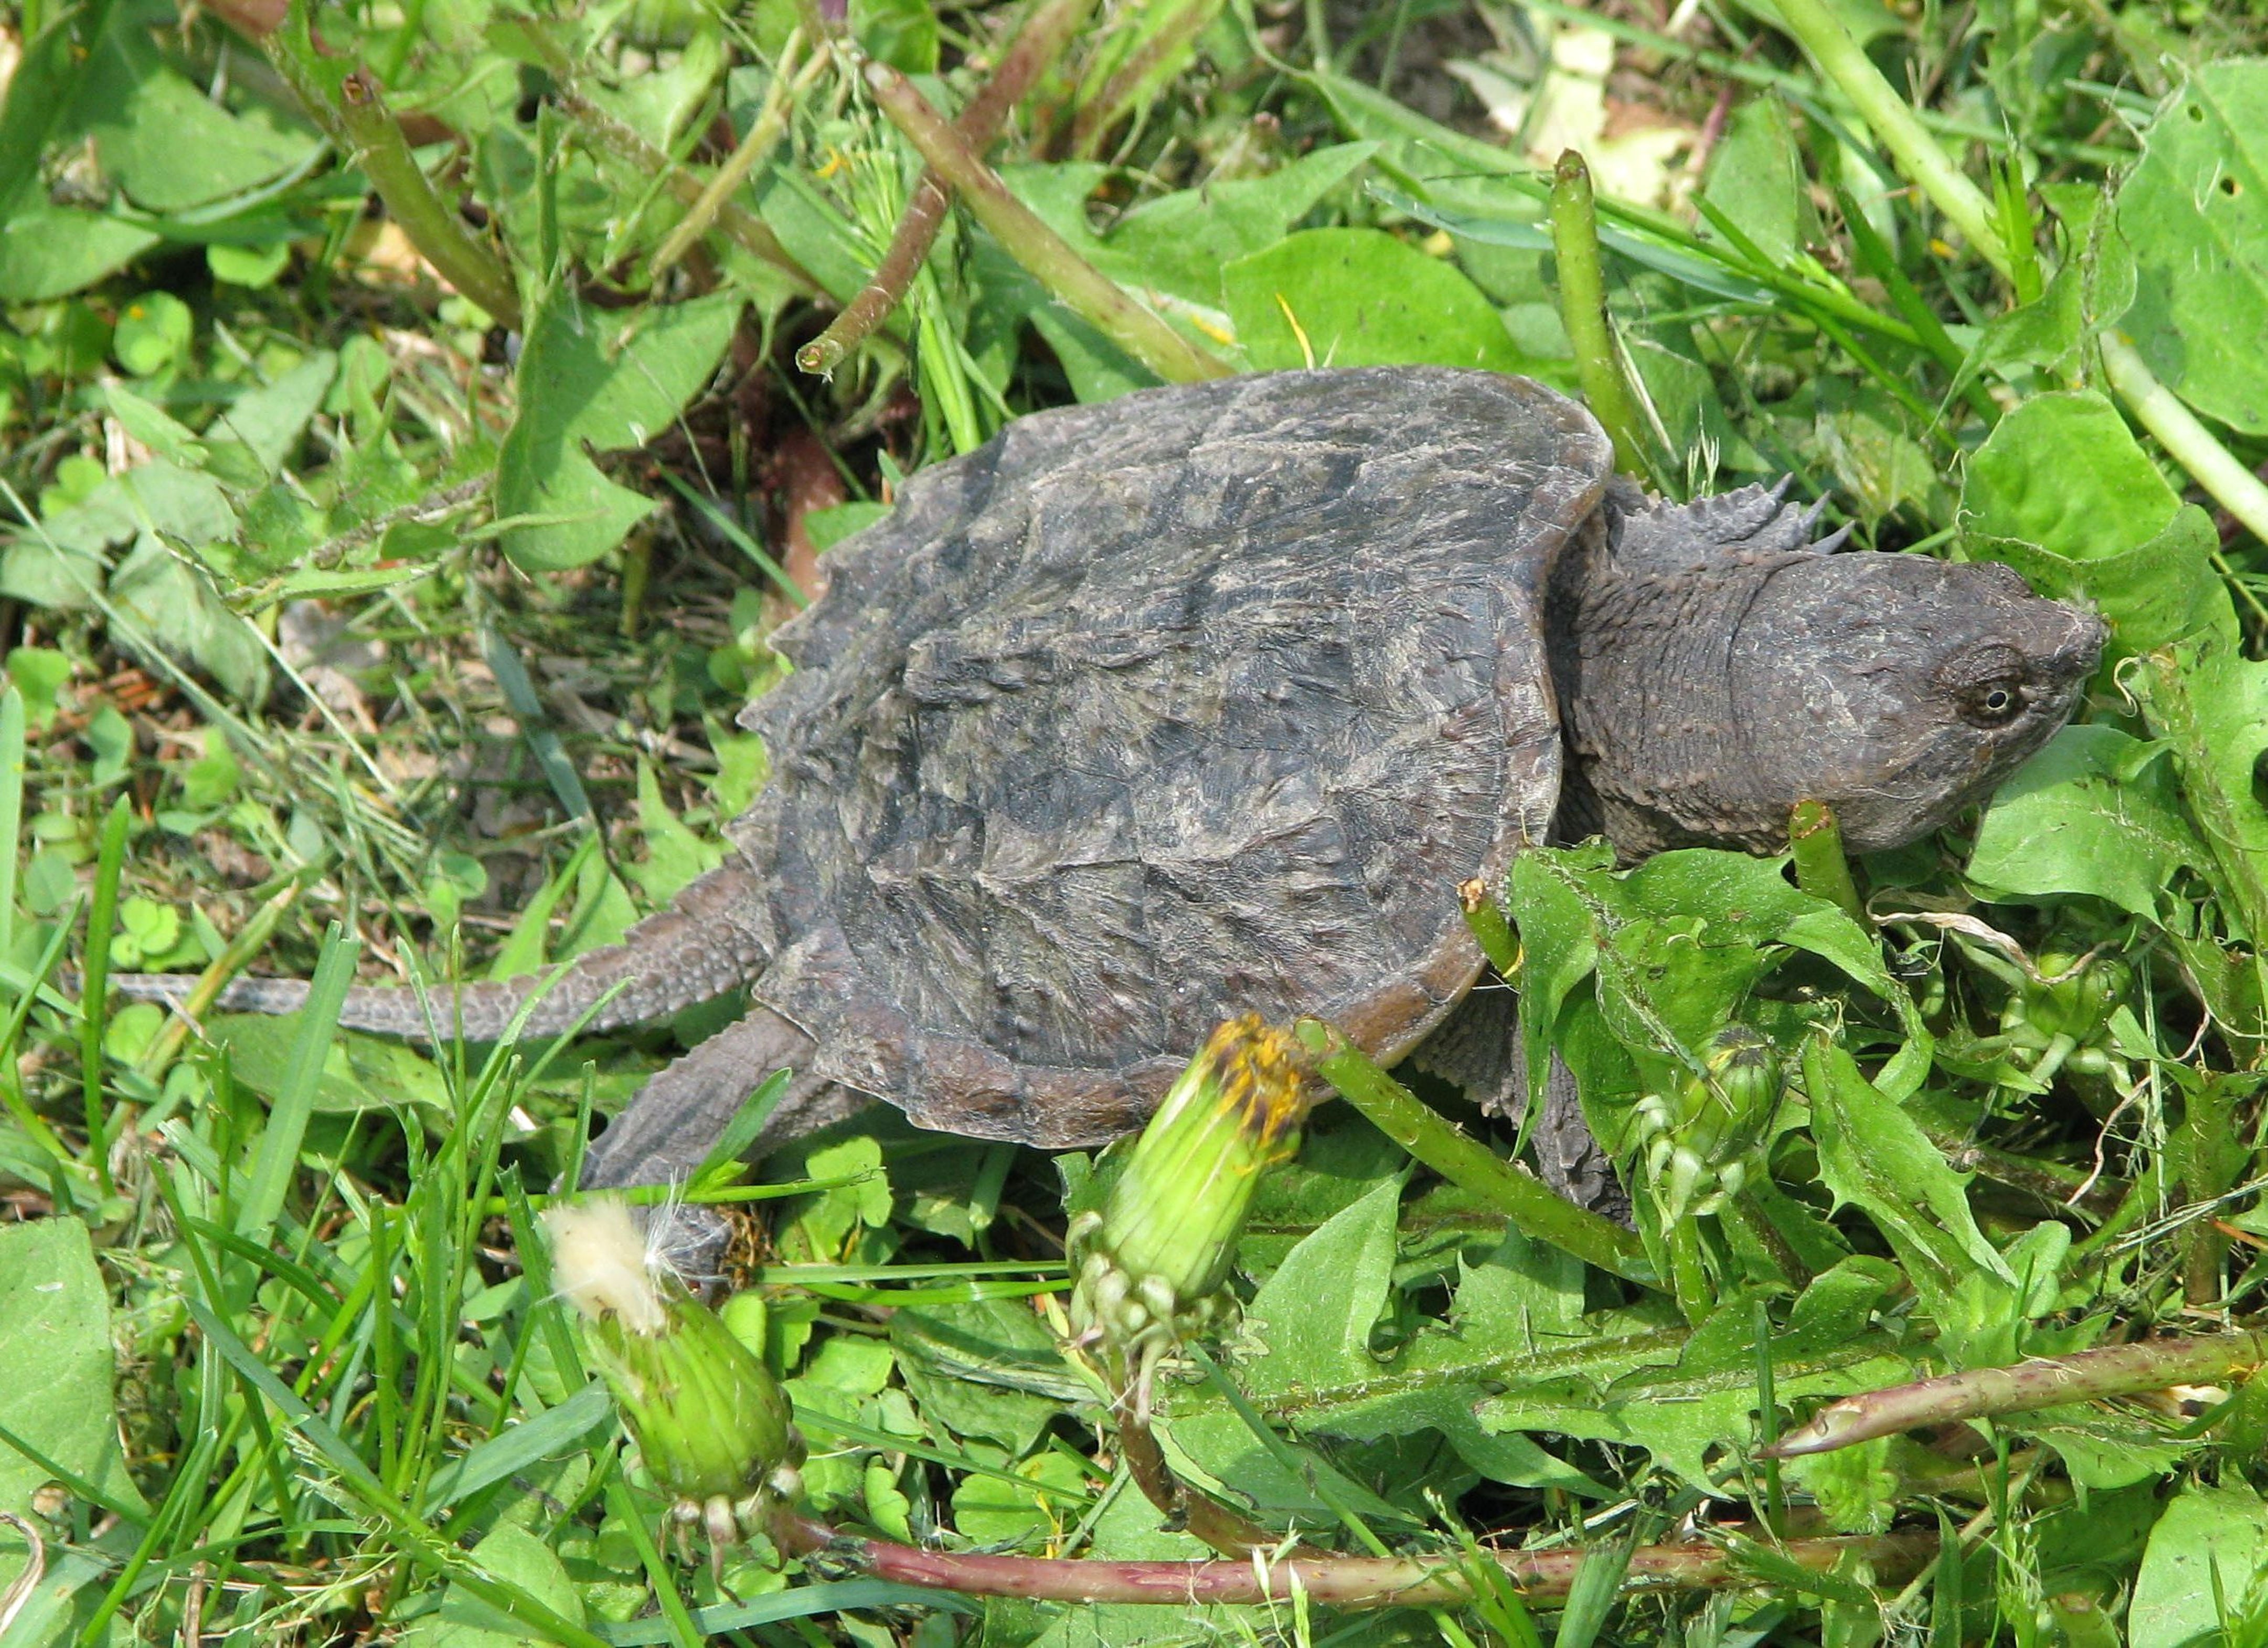 black snapping turtle